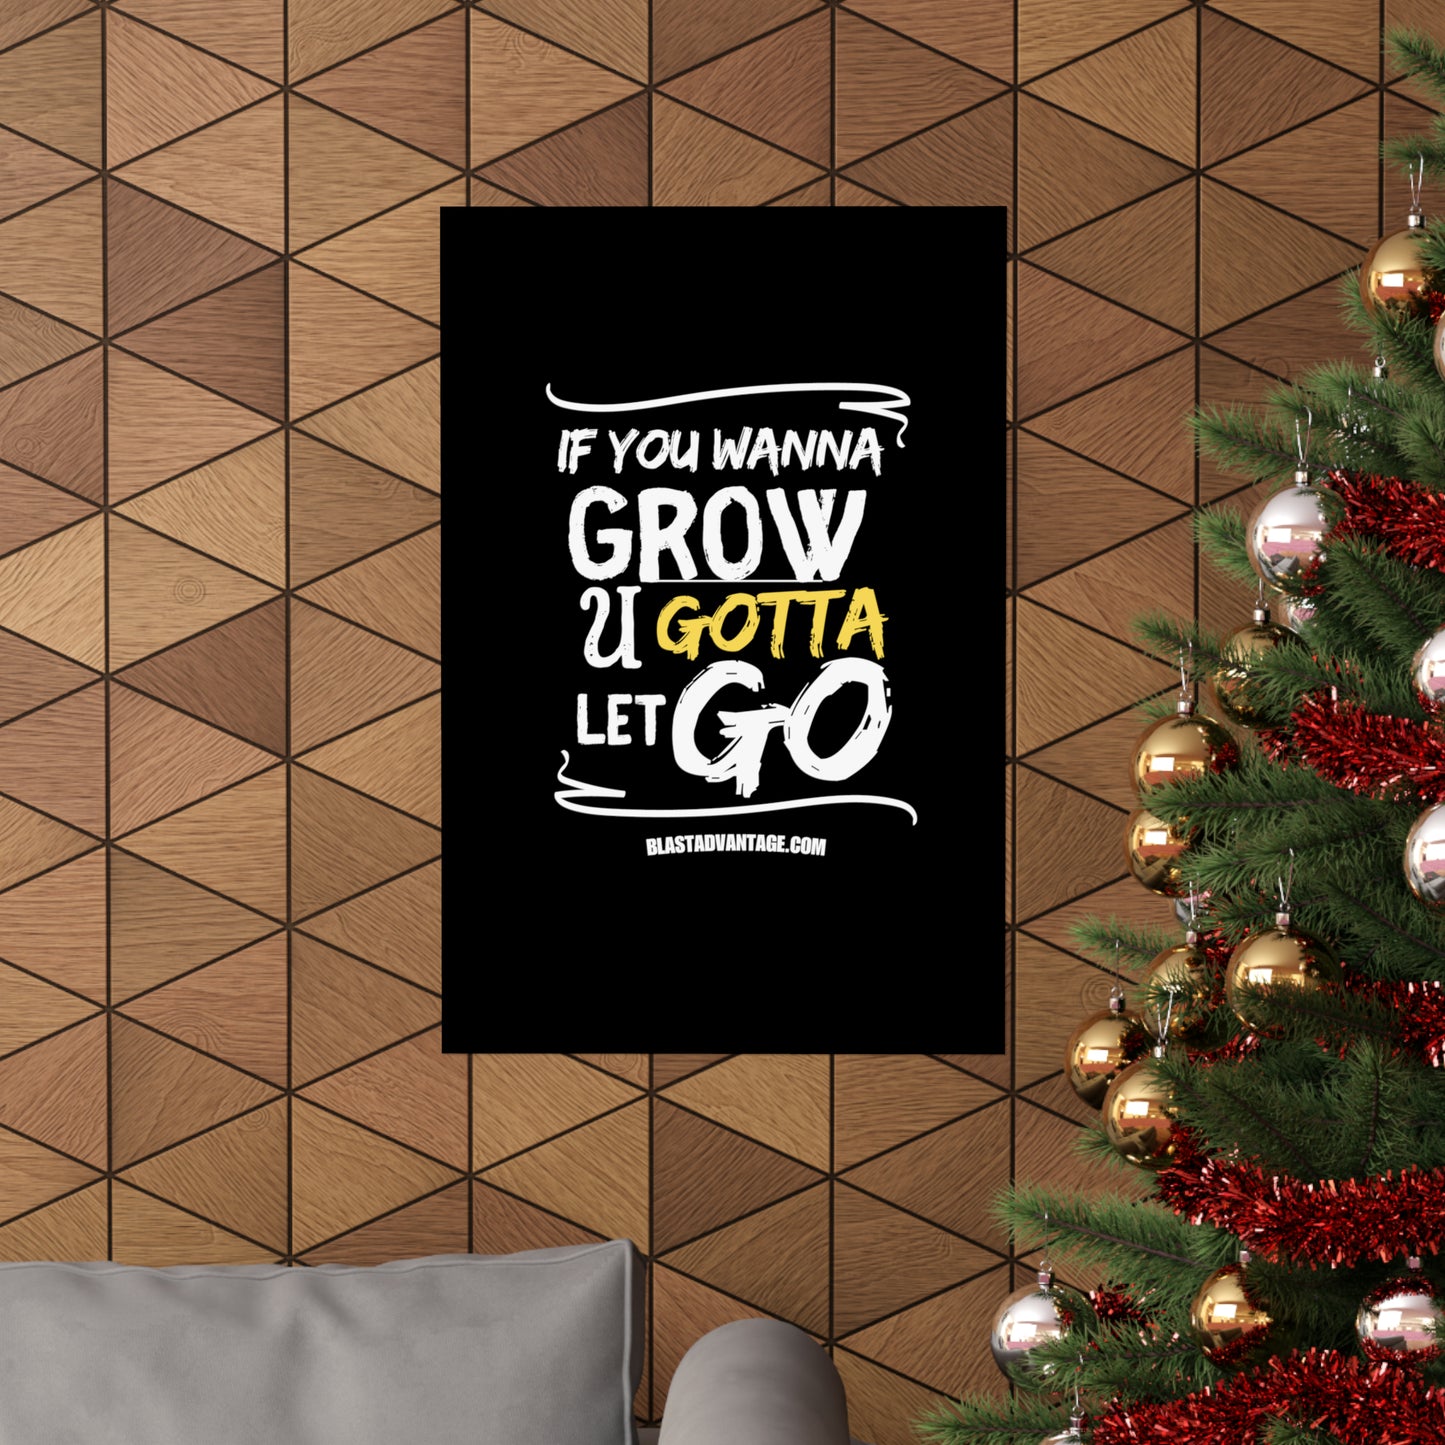 Let Go, Grow, and Soar: Inspirational Poster for Personal Growth - Matte Vertical Posters